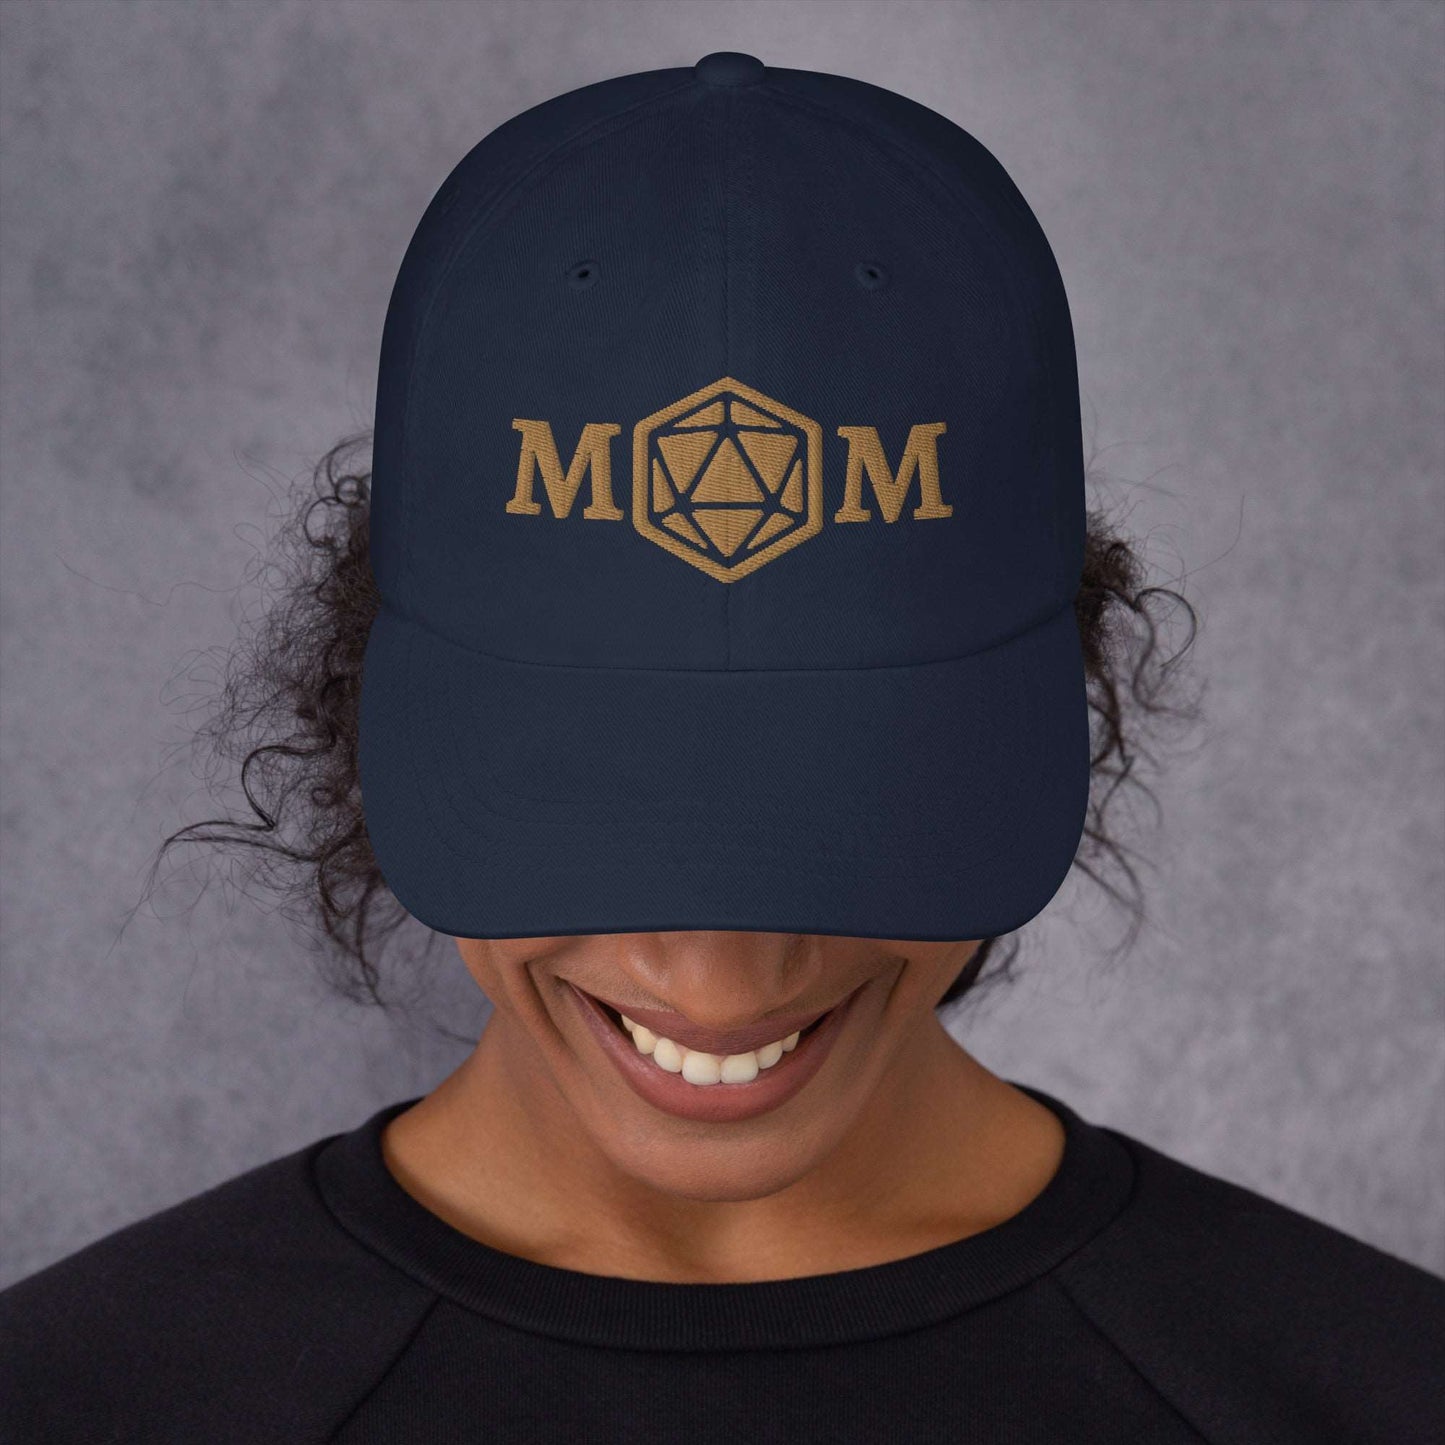 D&D Mom Hat - Embroidered D20 Cap for Gaming Mothers Hat Navy